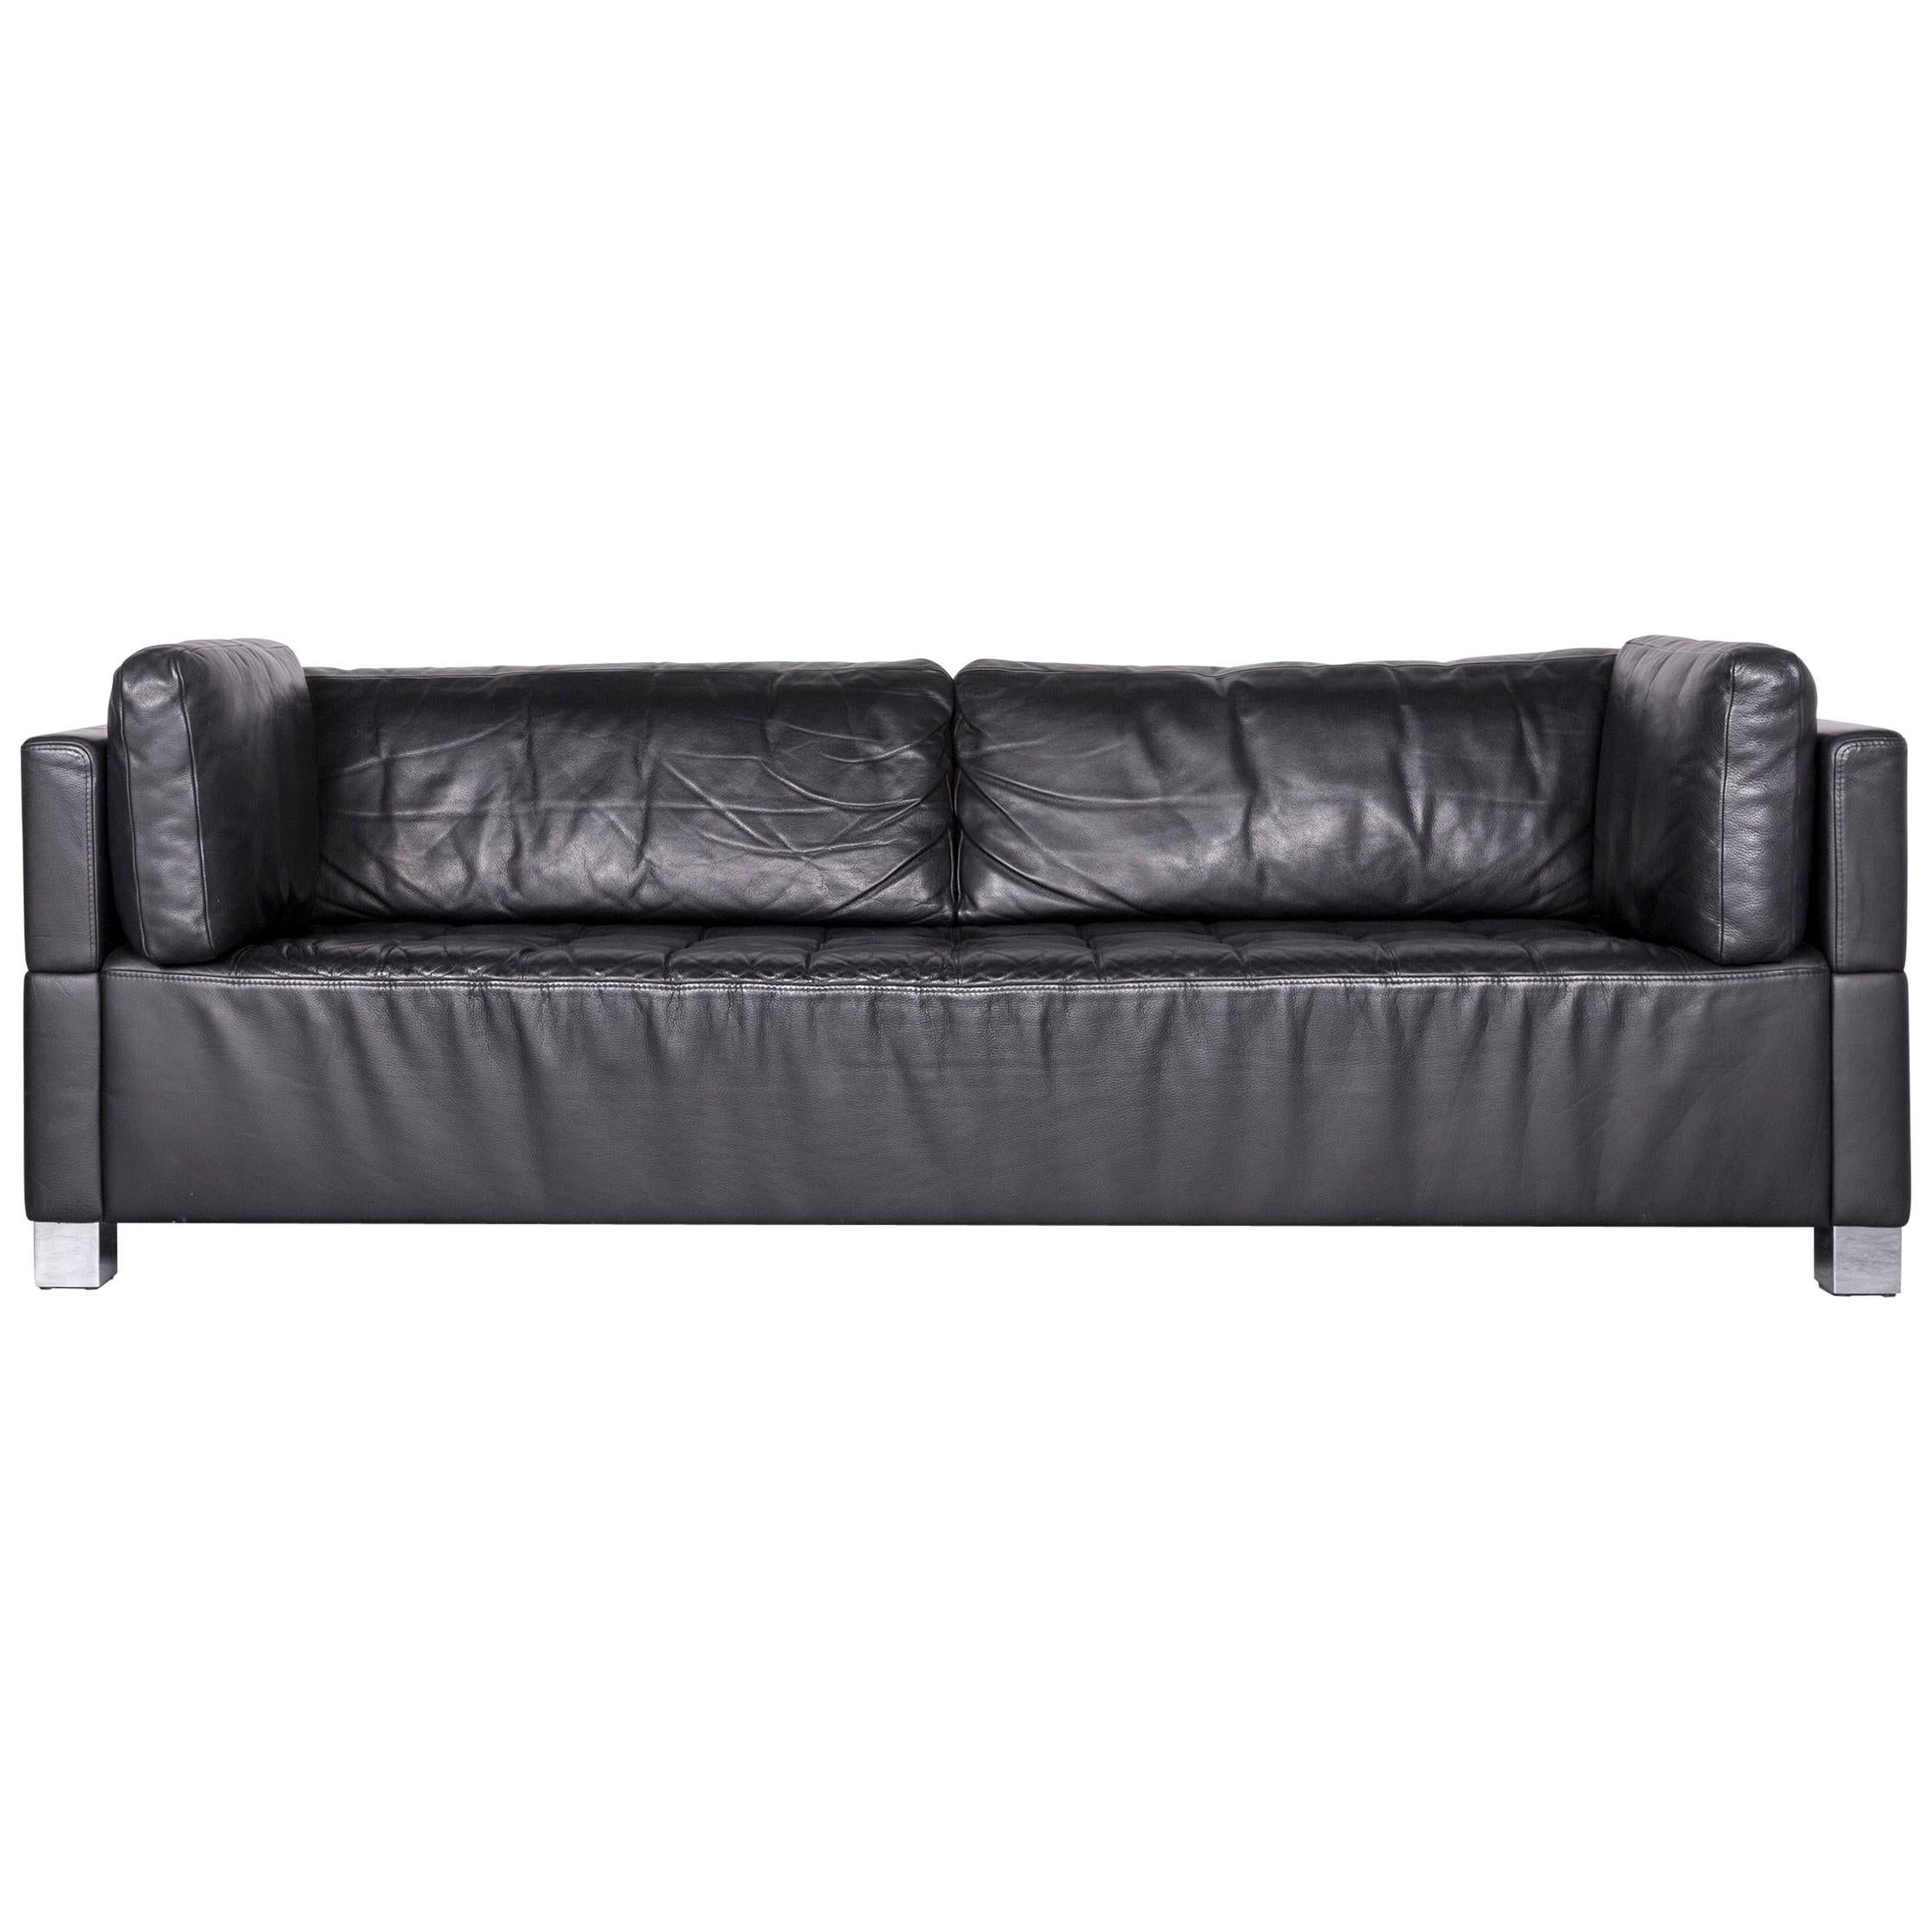 Brühl & Sippold Carrée Designer Leather Sofa Black Three-Seat Couch